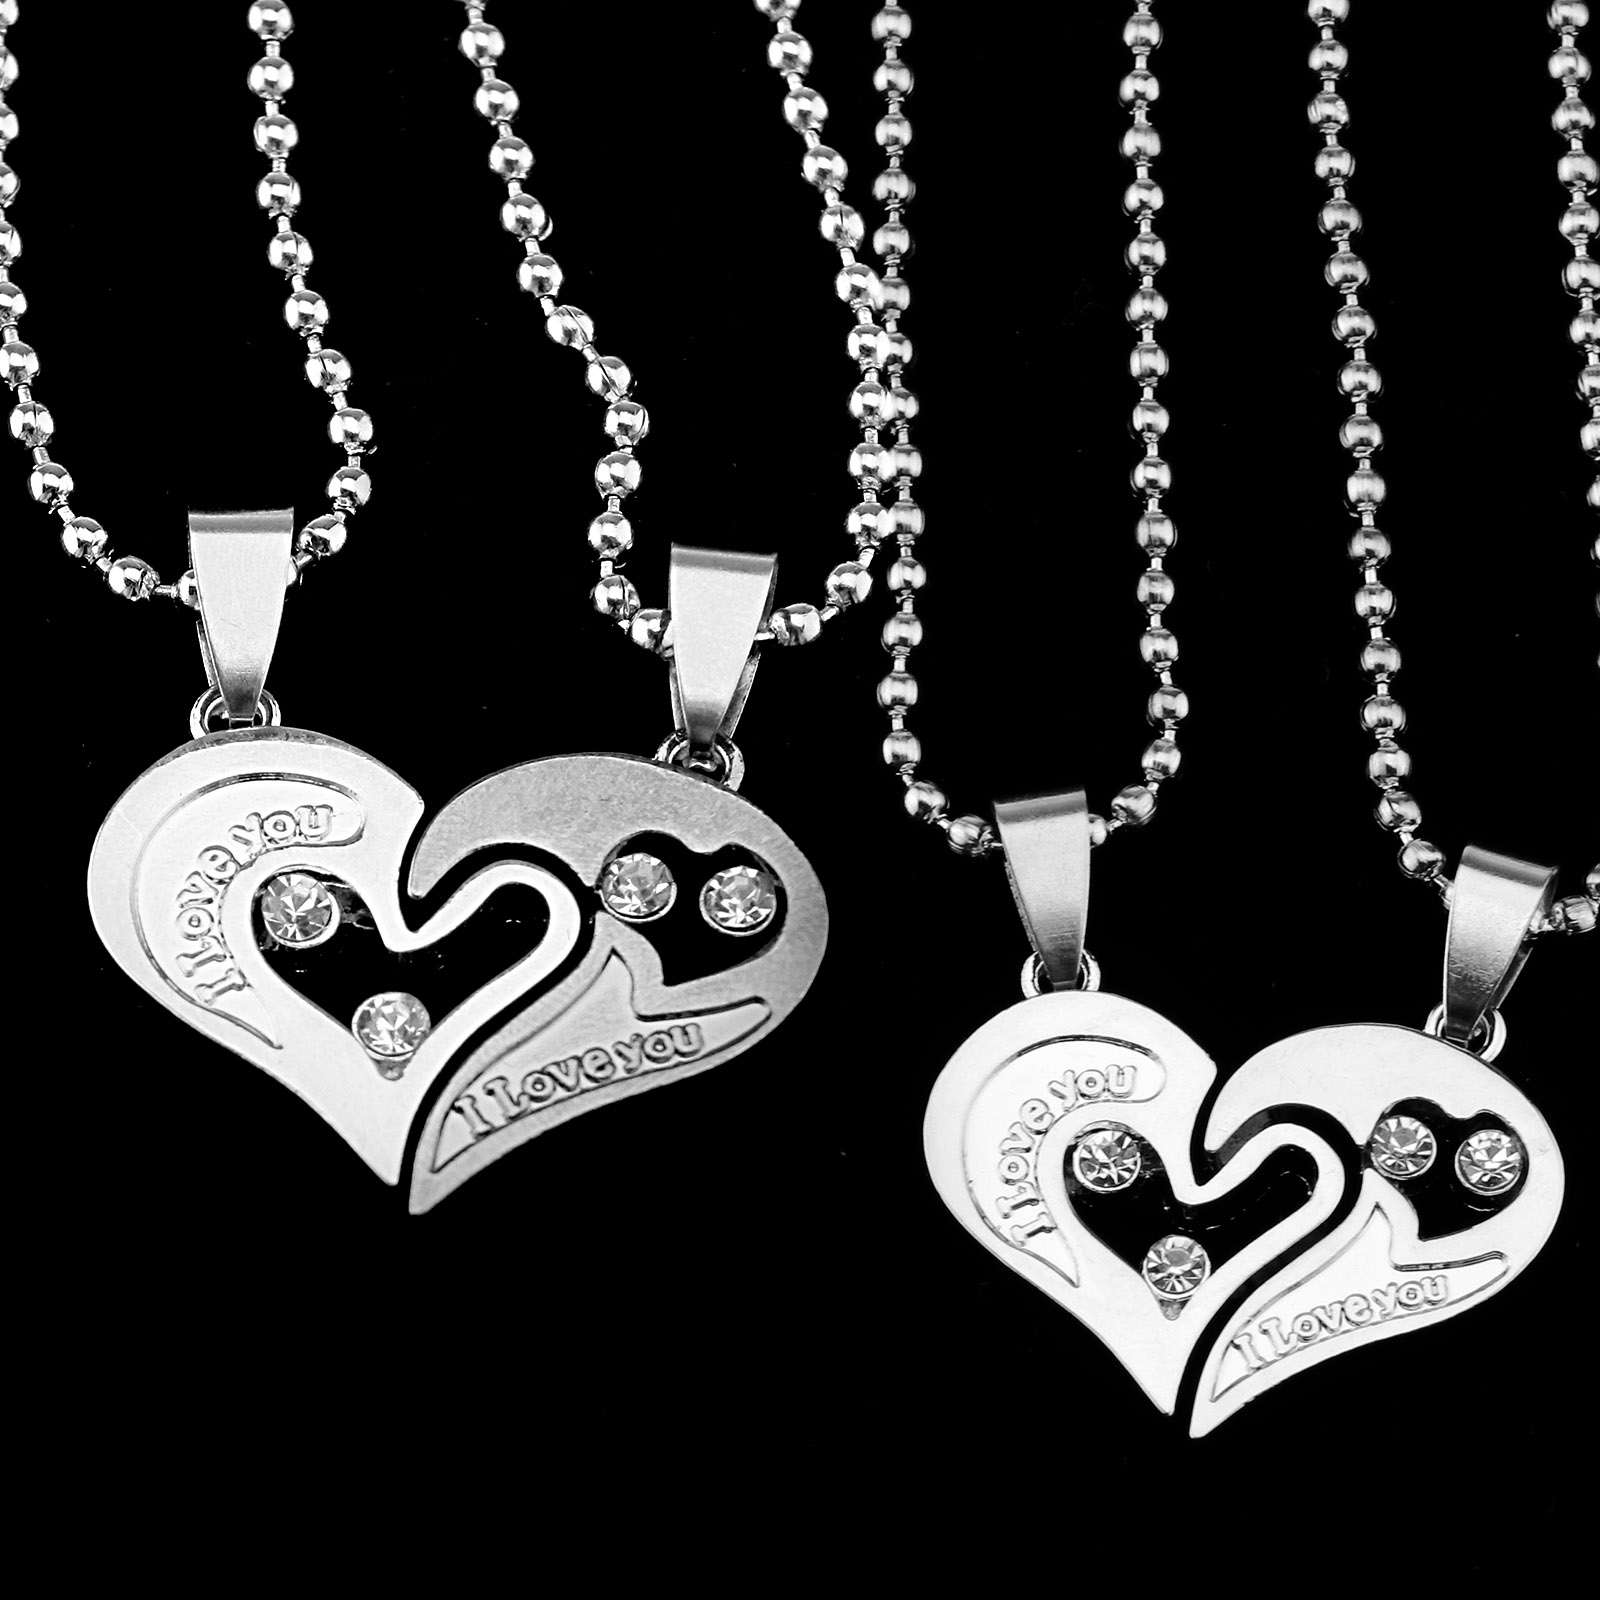 Pairs His and Hers Stainless Steel I Love You Heart Pendant Couple Necklaces NEW